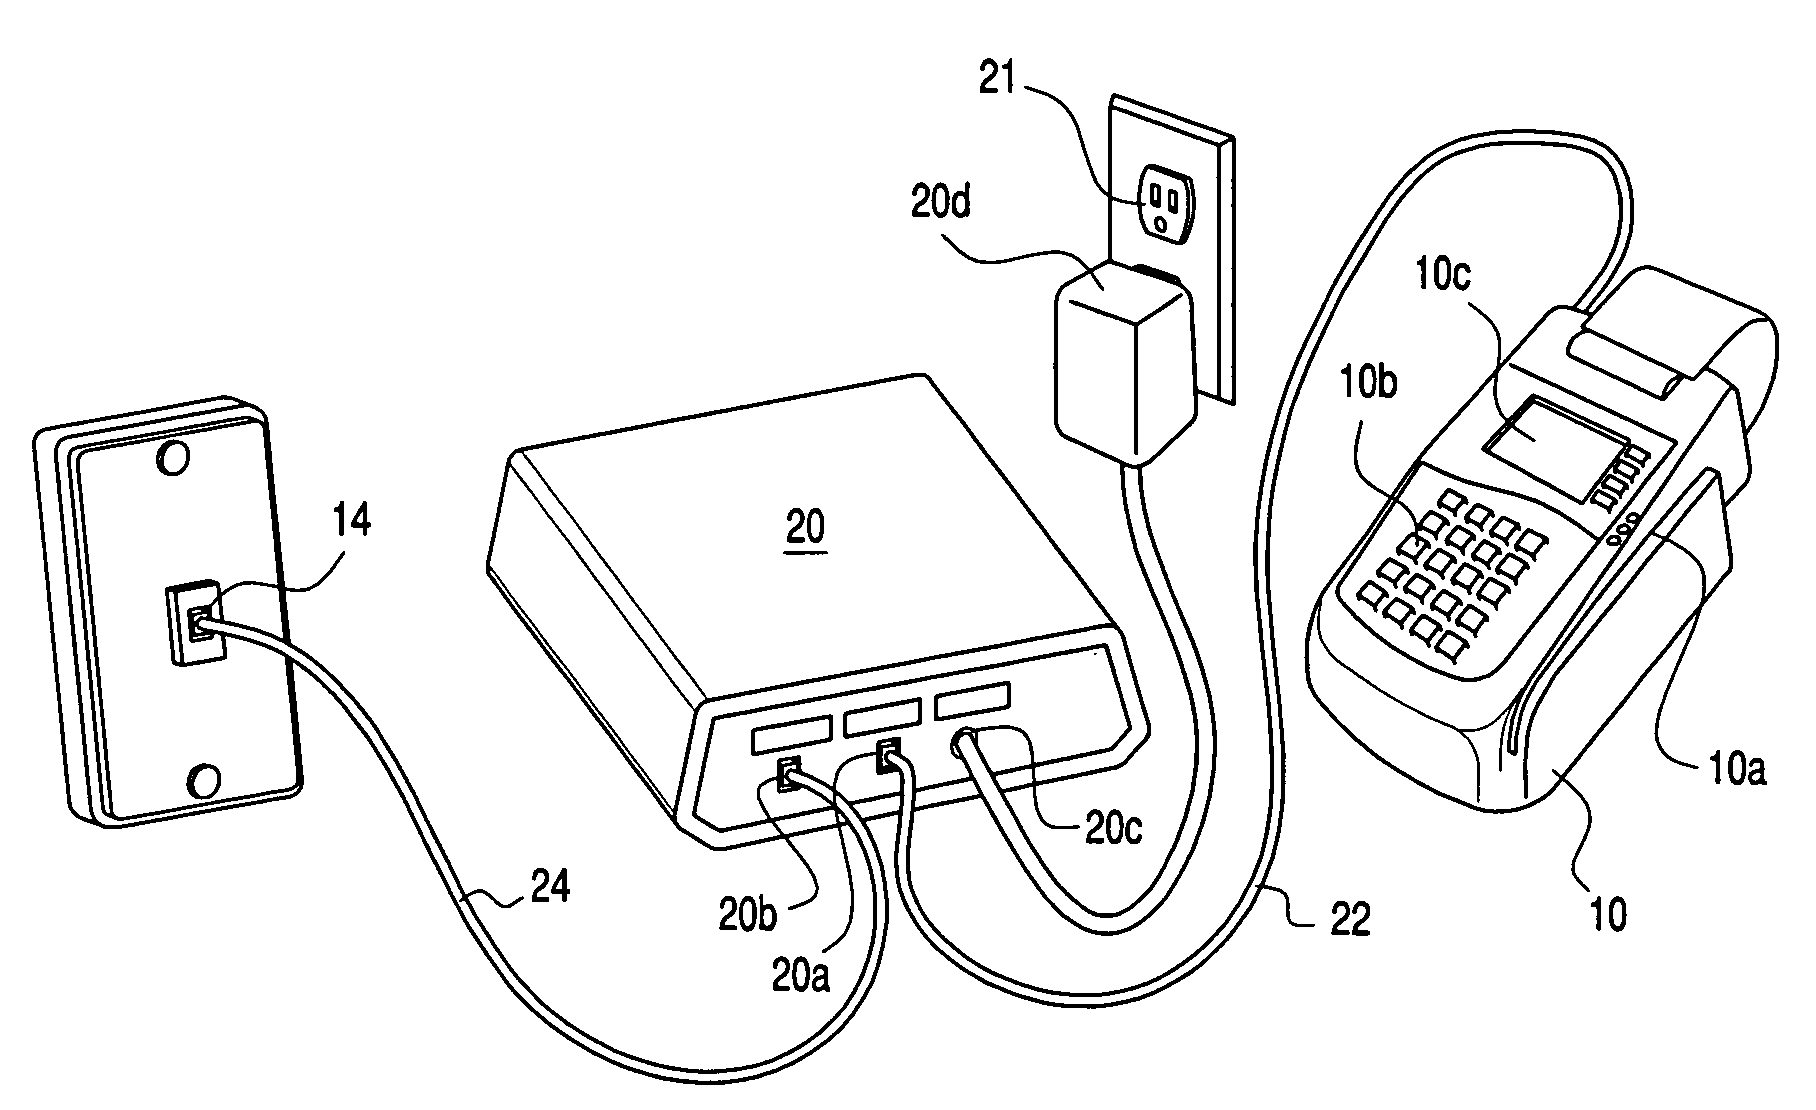 Intelligent transaction router and process for handling multi-product point of sale transactions